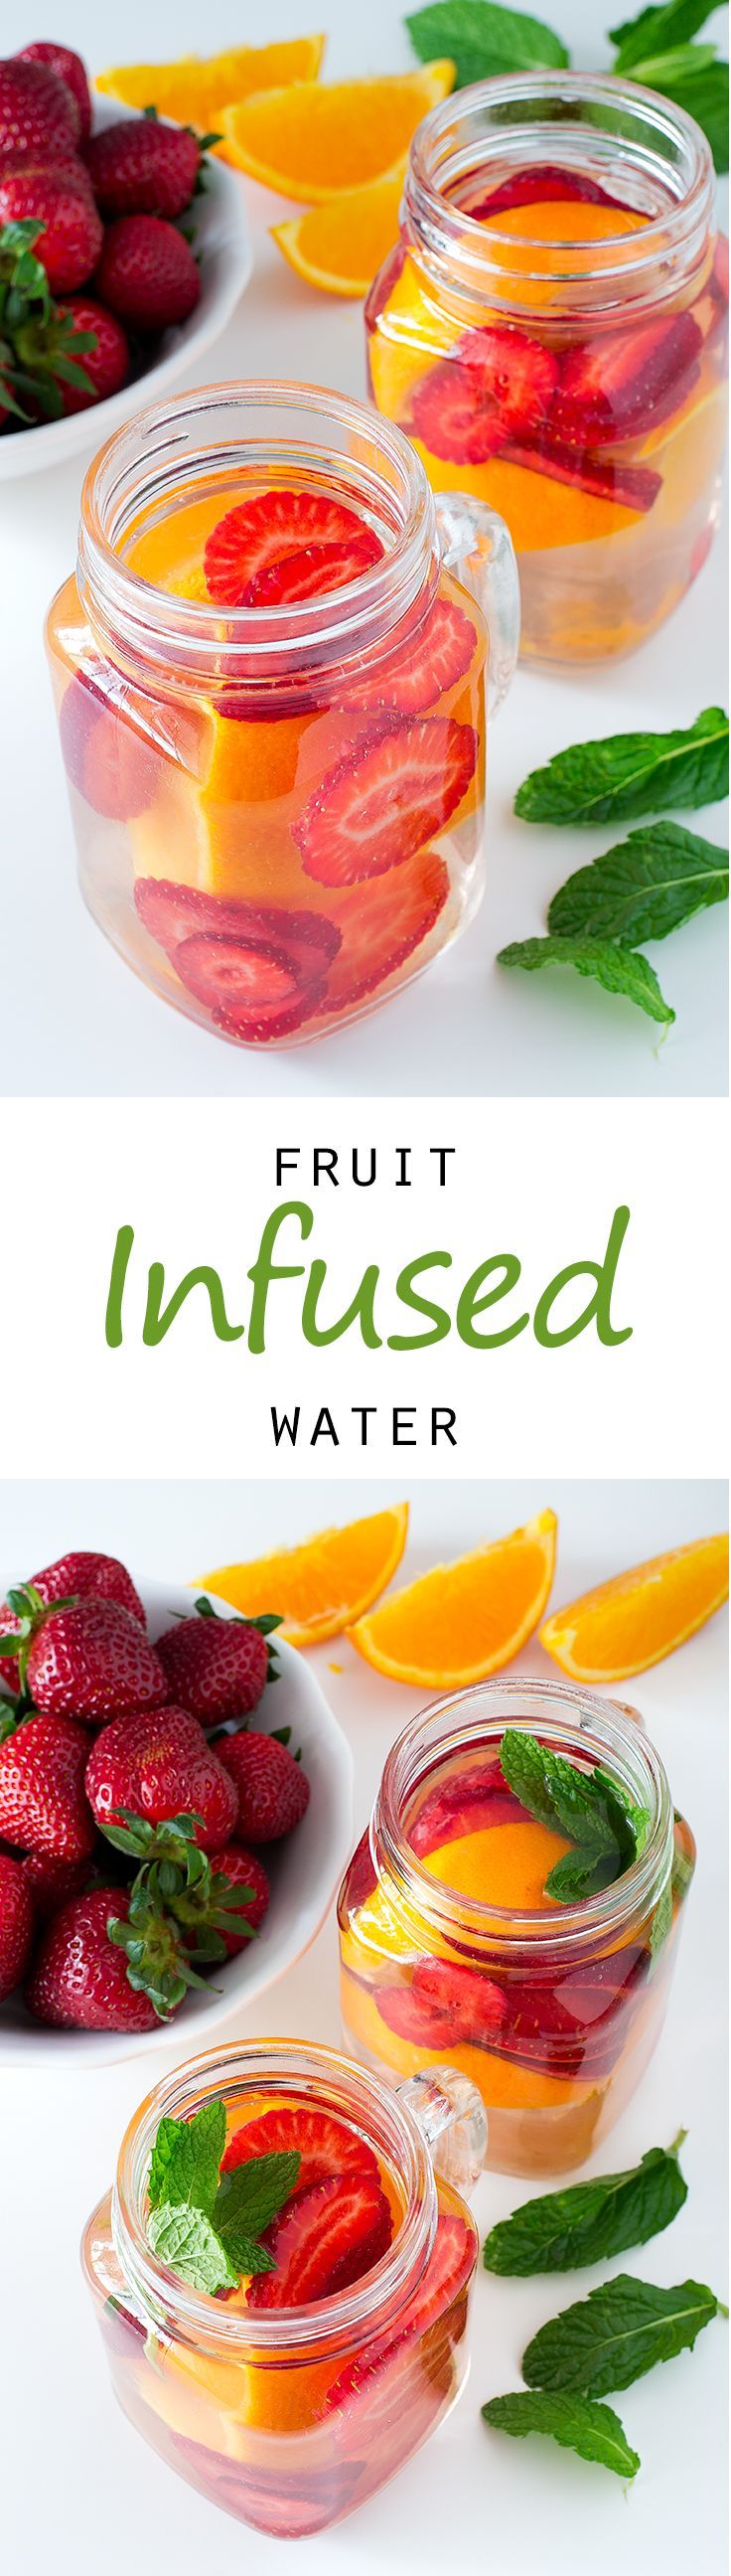 Fruit Infused Water is so refreshing and hydrating! // In need of a detox? 10% off using our discount code ‘Pinterest10’ at